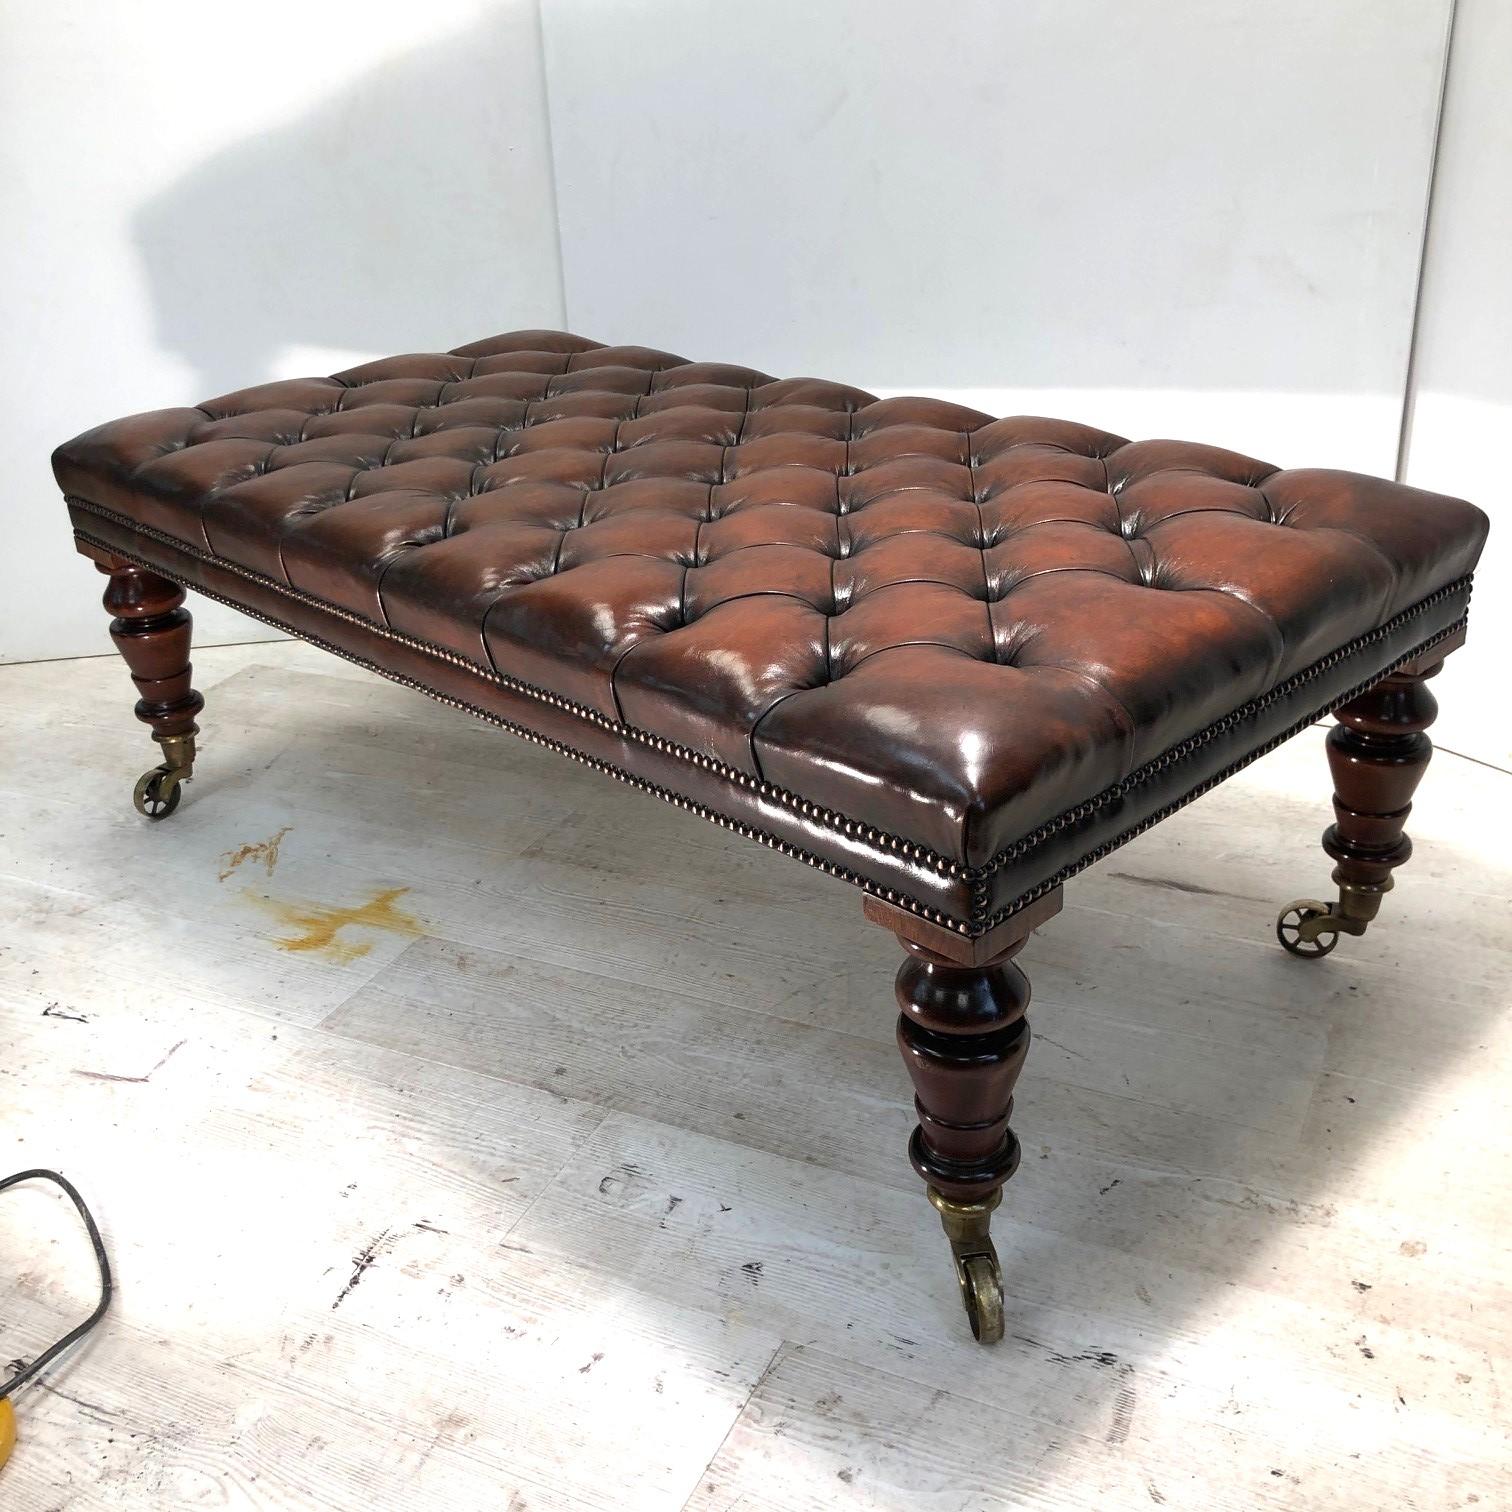 We are delighted to offer for sale this very large, fully restored, hand dyed brown leather Chesterfield hearth stool ottoman with oversized wagon wheel castors 

A very good looking well made and decorative hearth stool, this sat between two